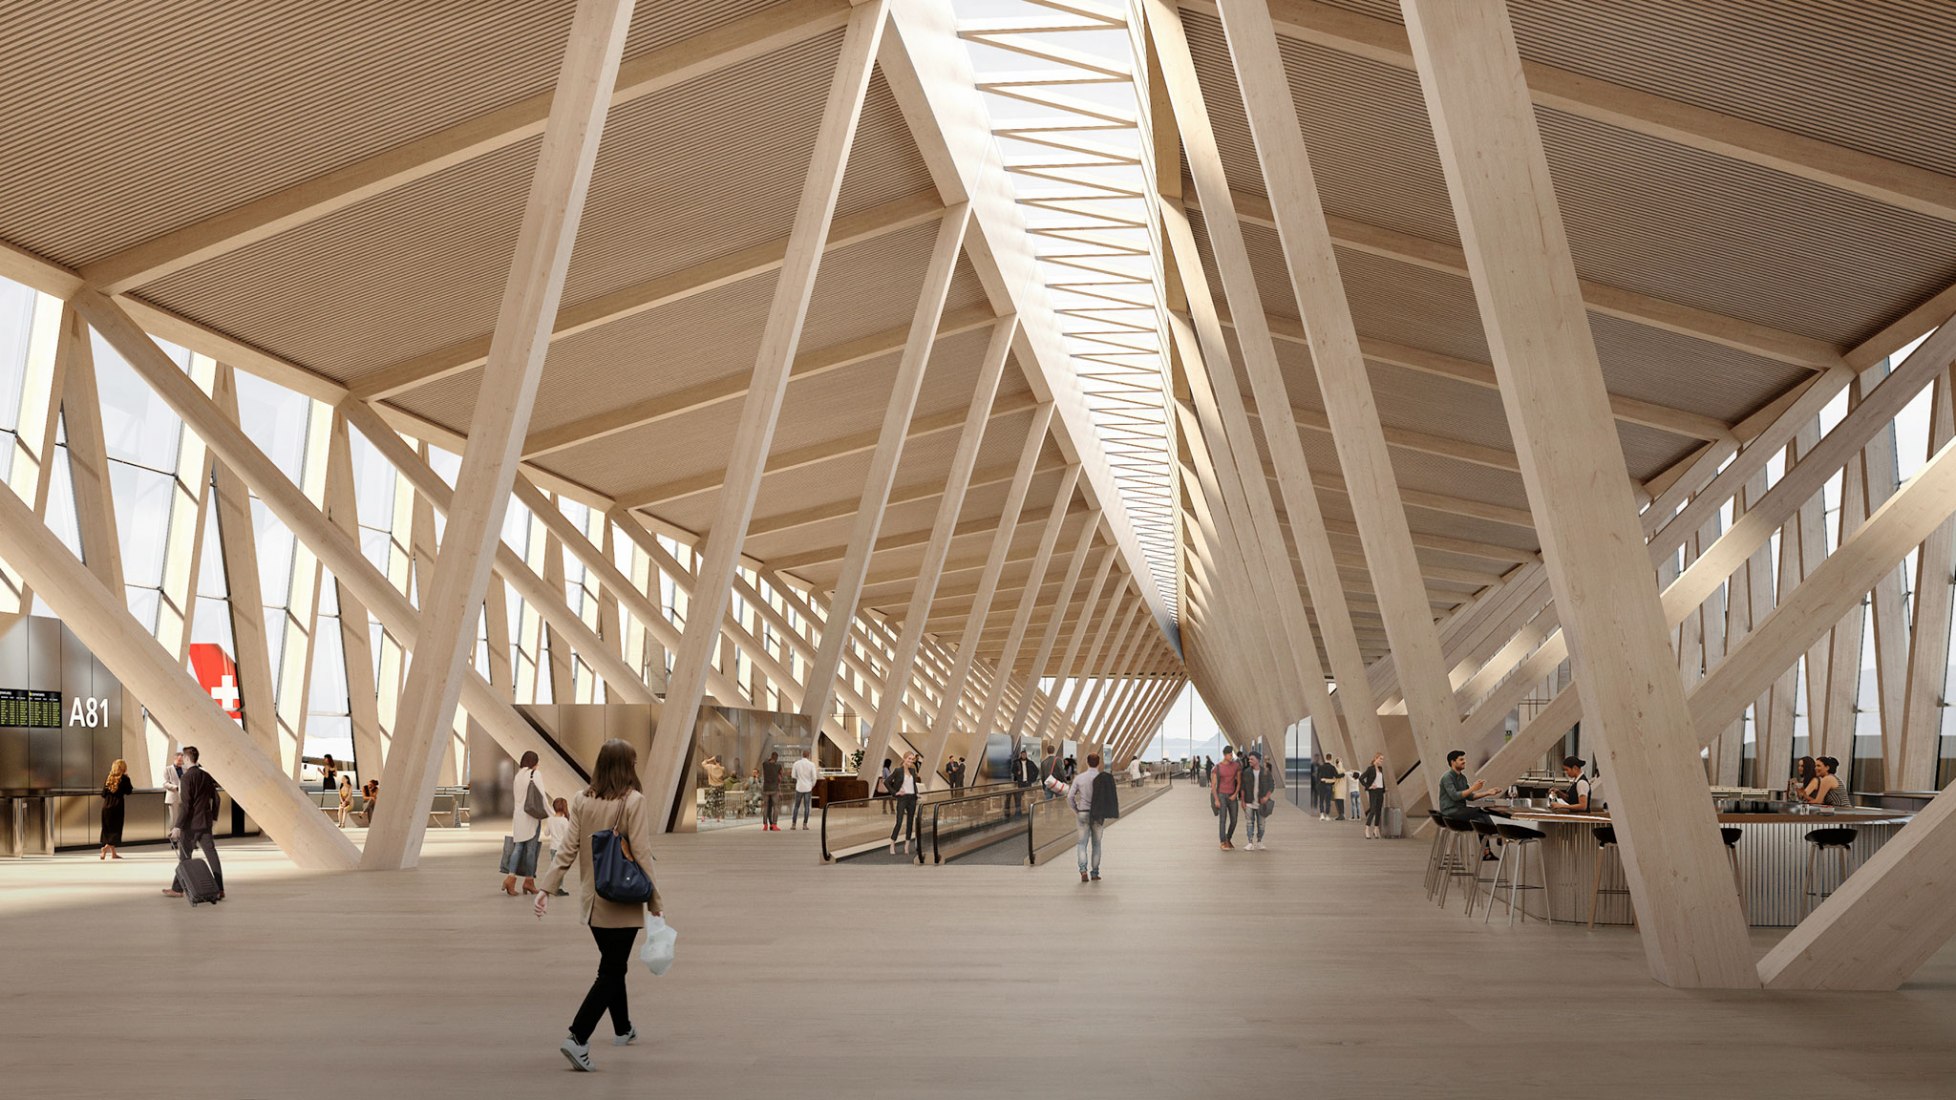 Interior view. ZRH by BIG, HOK, 10:8 architects. Rendering by BIG